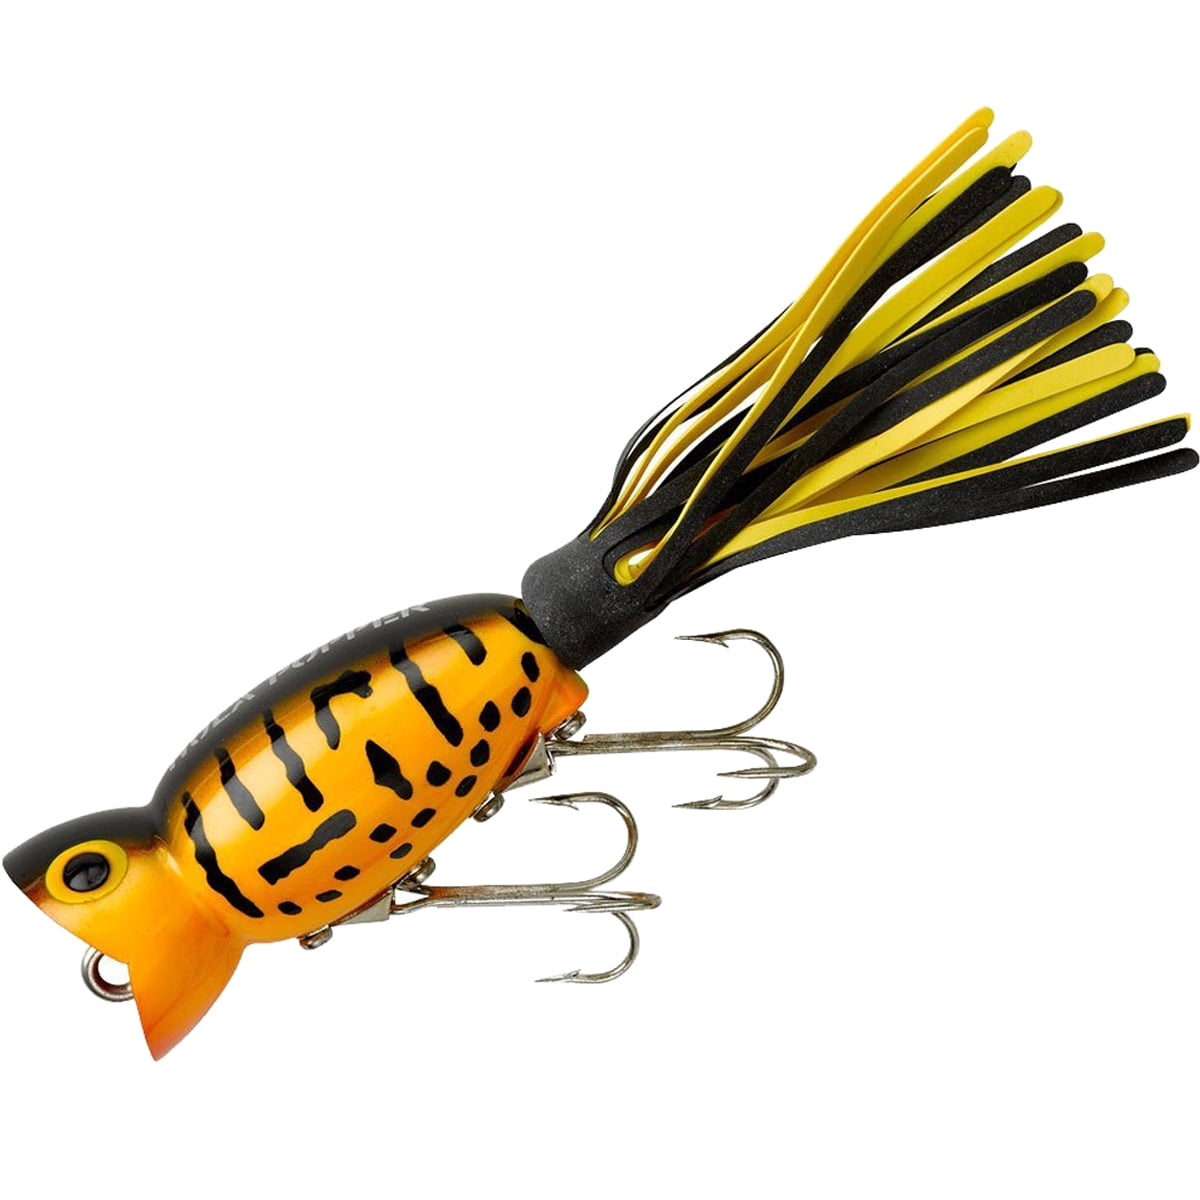 Arbogast G761-537 ARB Hula Popper2.0-Blue Kill New in package 